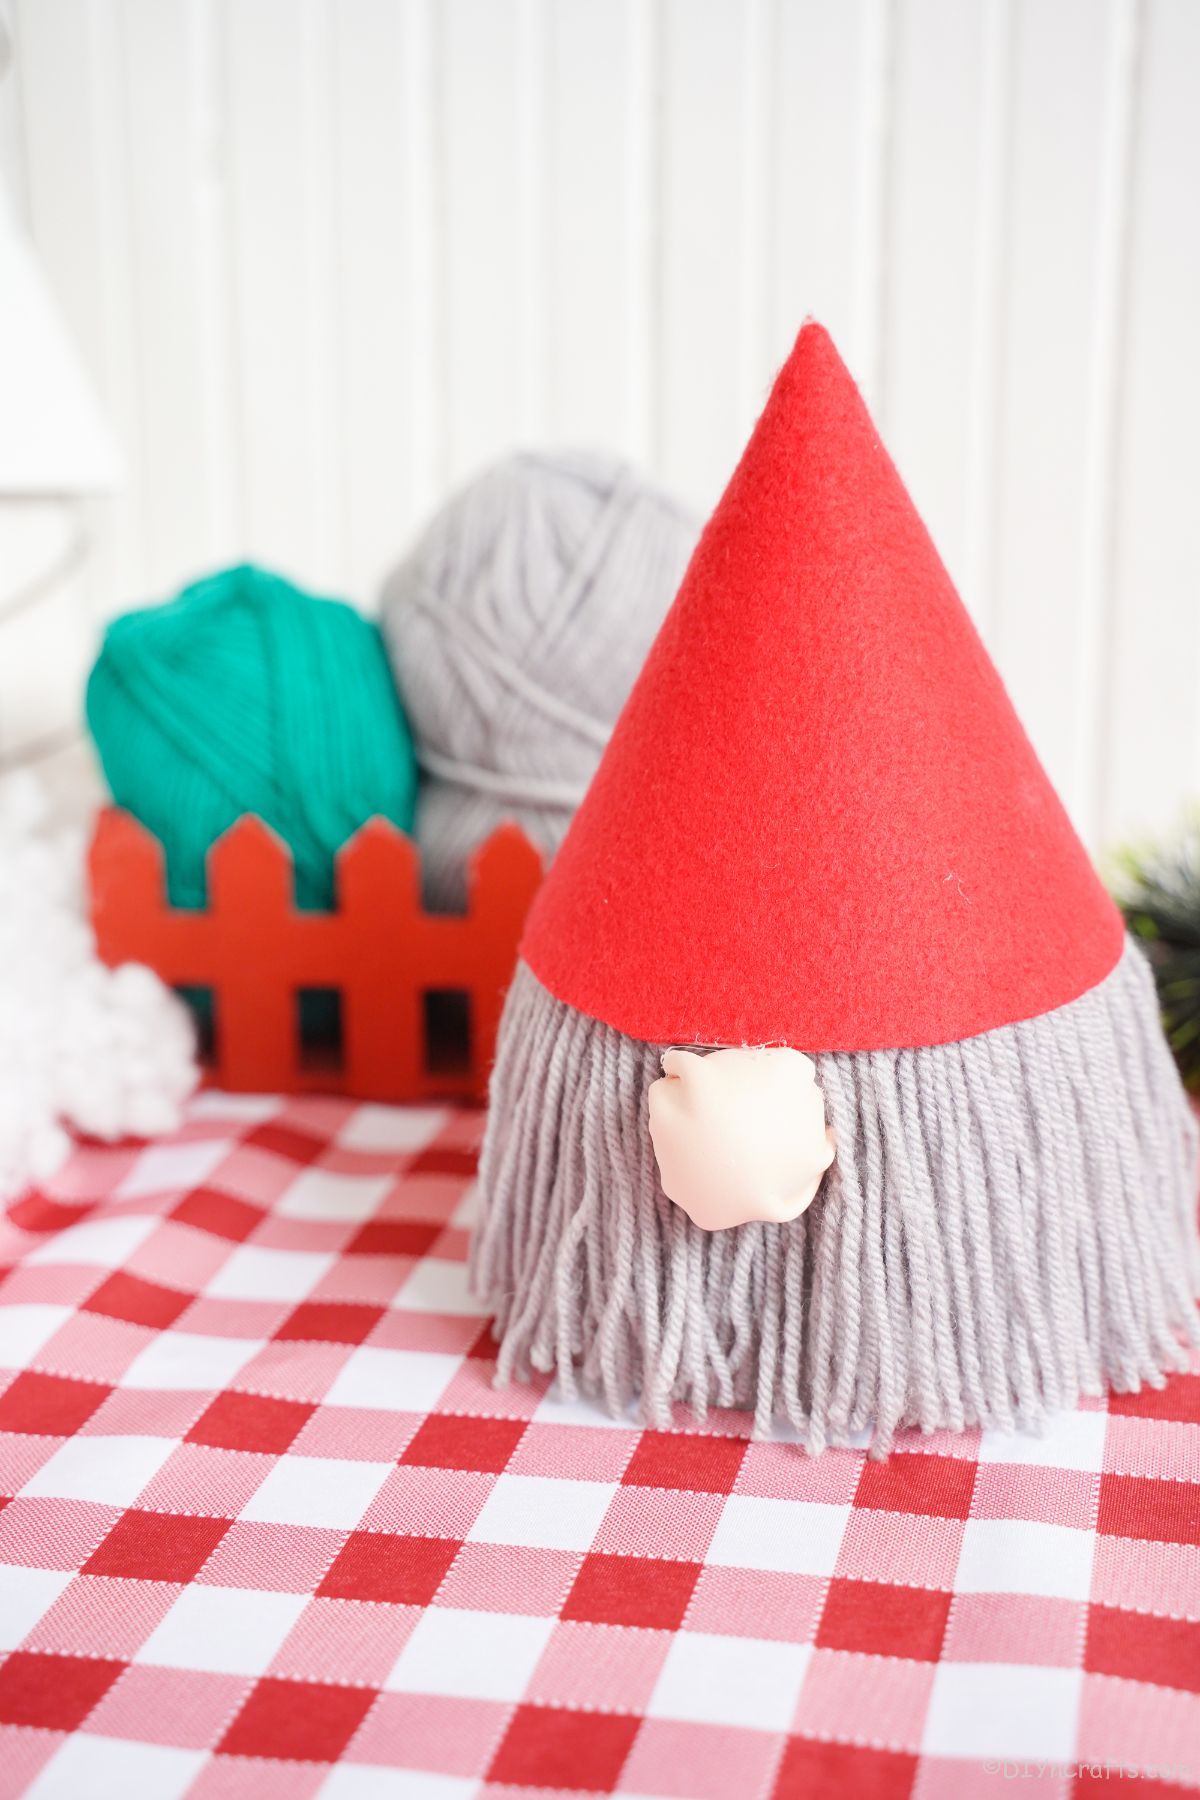 gnome with red hat and gray beard on table with red checked tablecloth